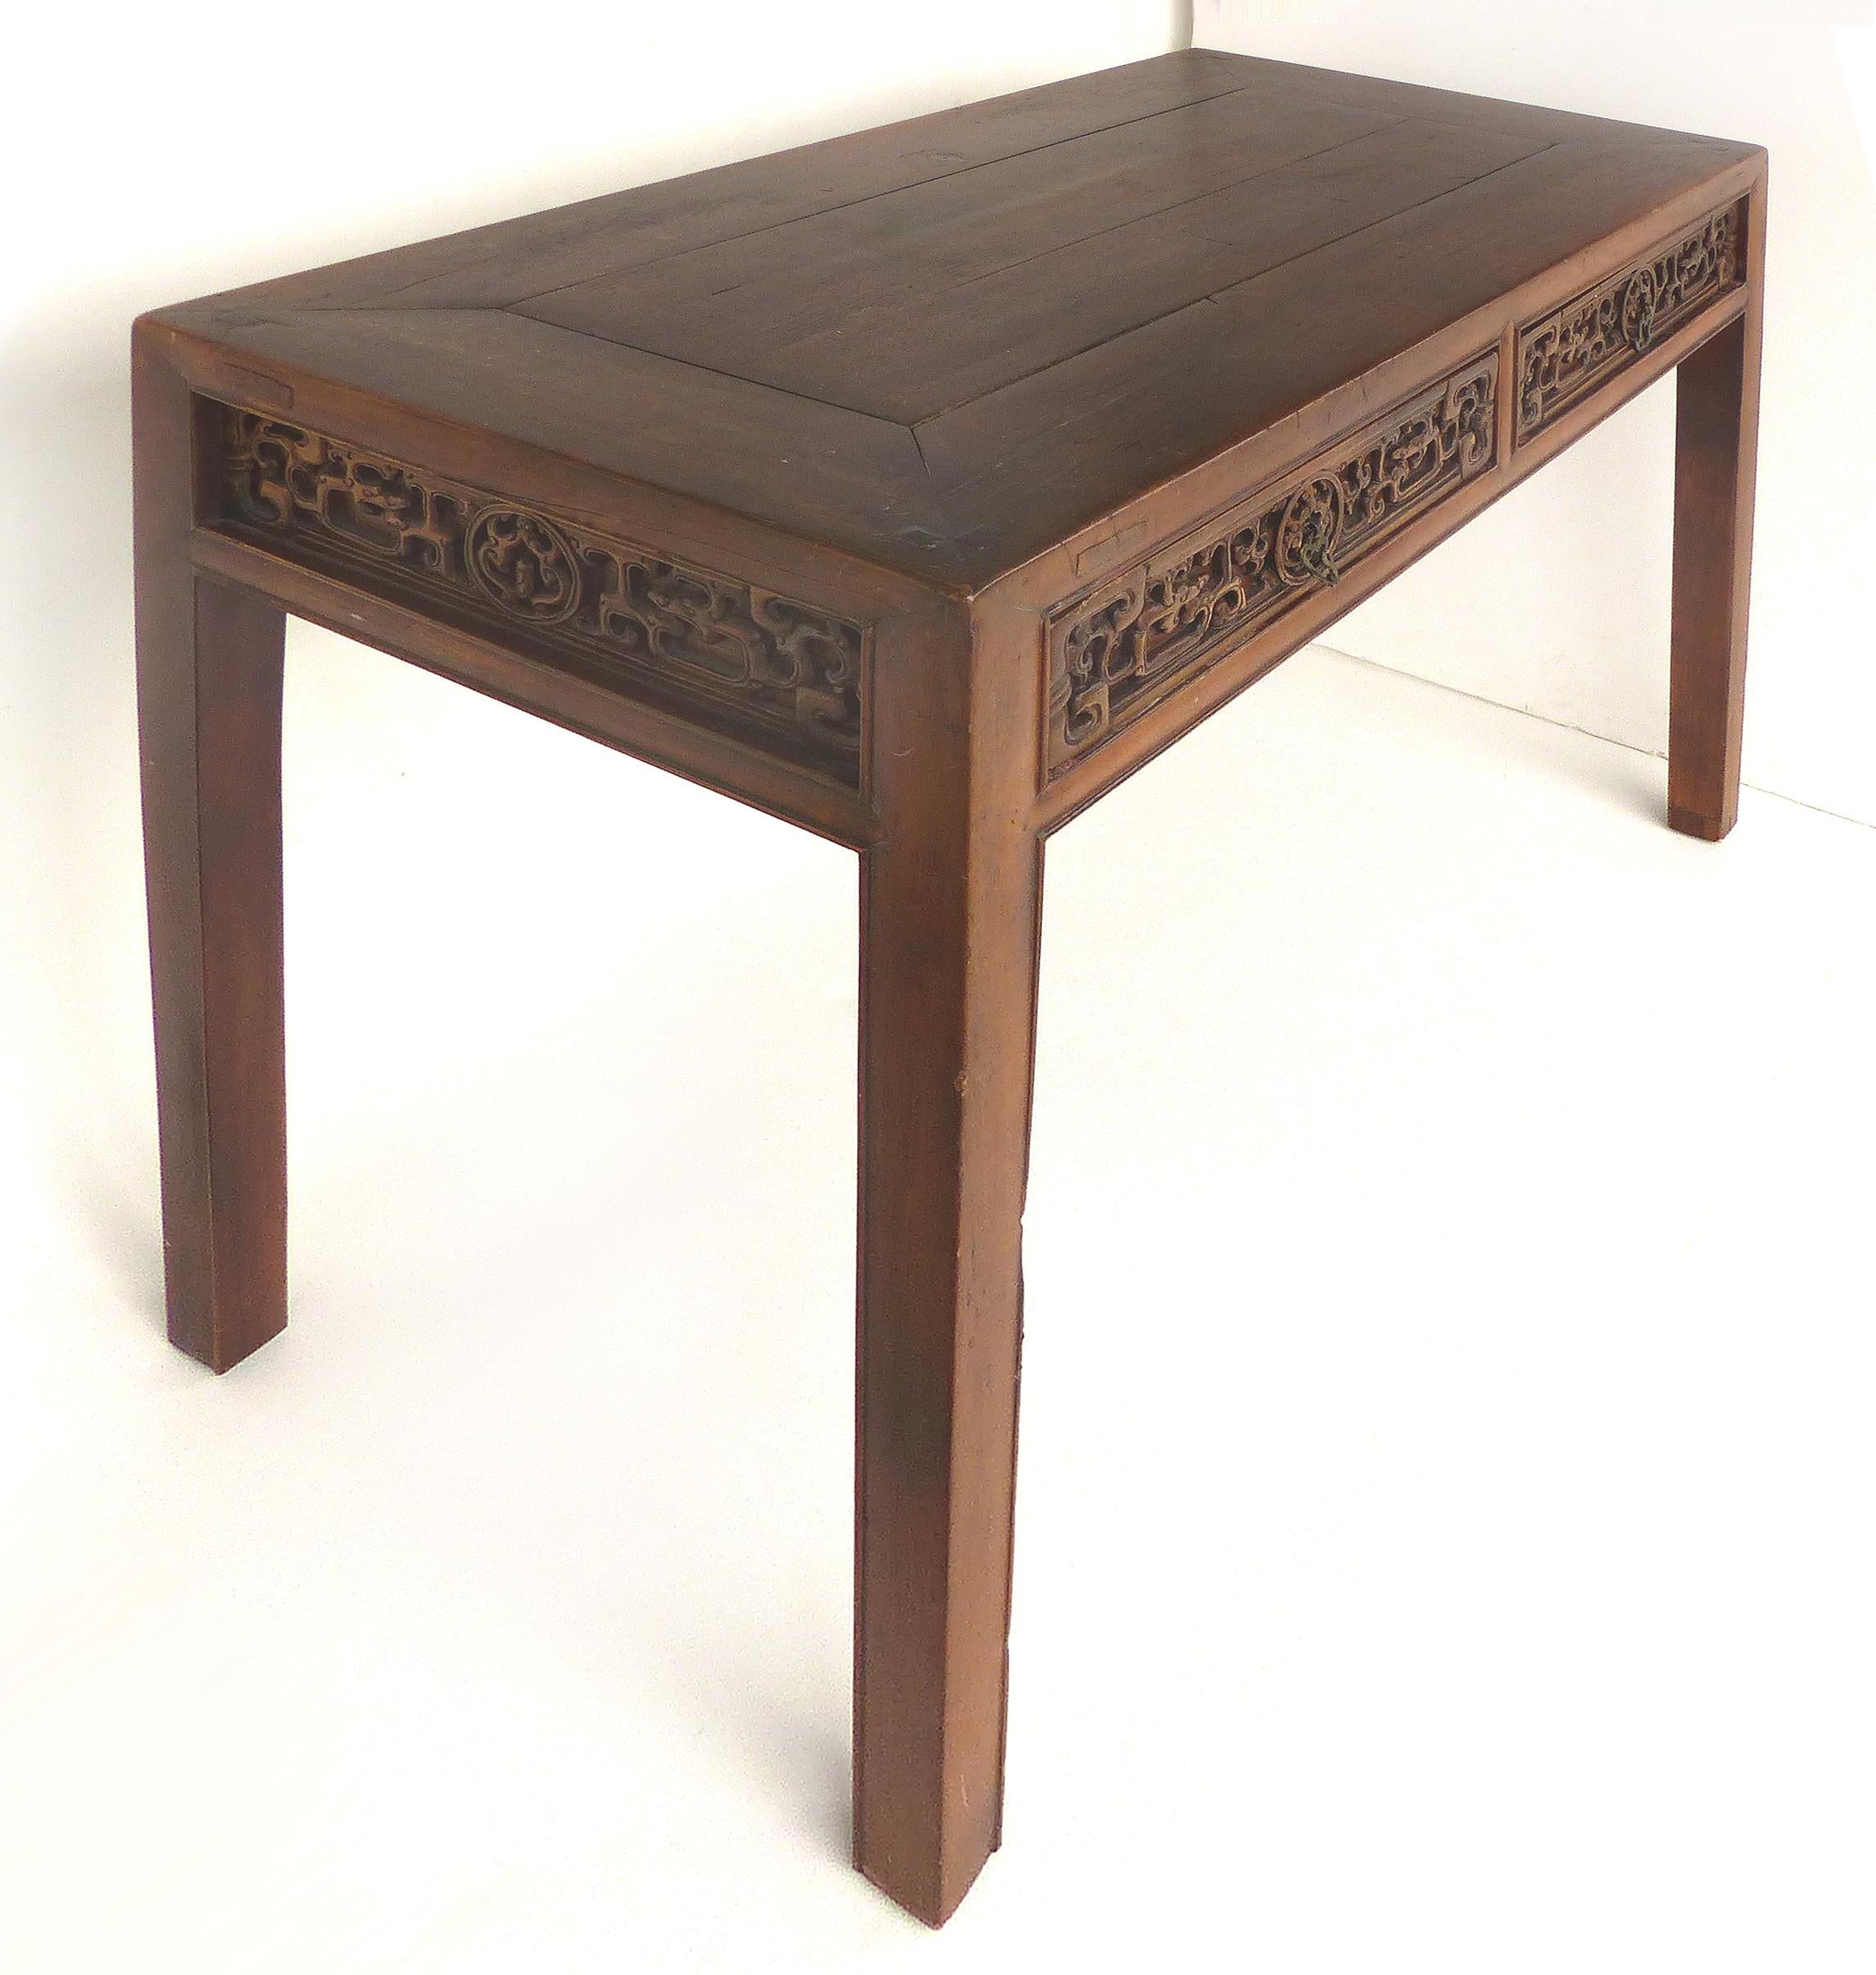 Chinese Carved Two-Drawer Console Table with Carved Apron

Offered for sale is a Chinese two-drawer carved console table with a nicely carved apron with panels on all sides including the back as pictured. The two drawers open to reveal dove-tailed